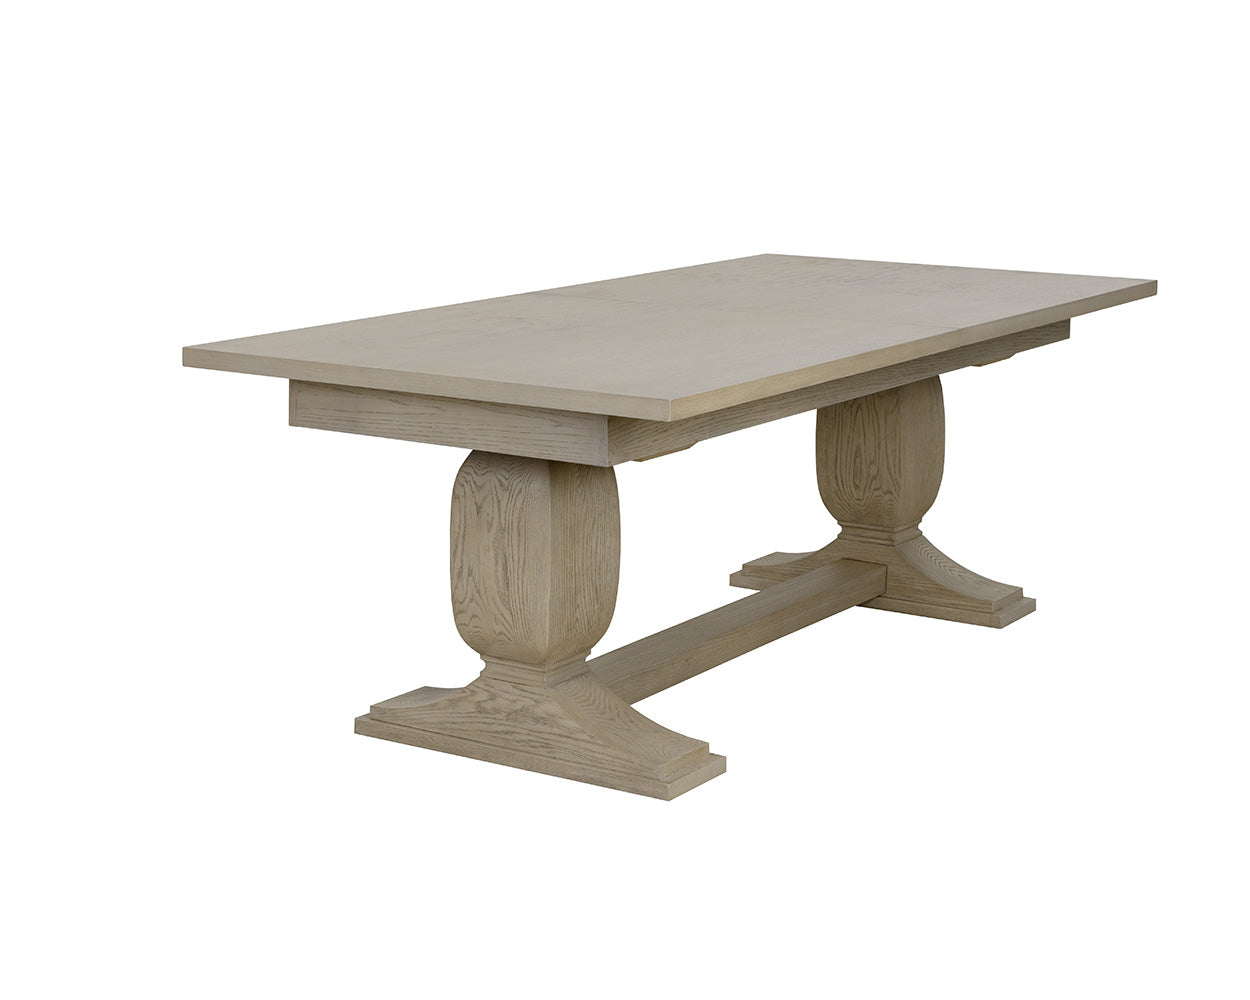 Rhaenyra Extension Dining Table - 86" to 120"